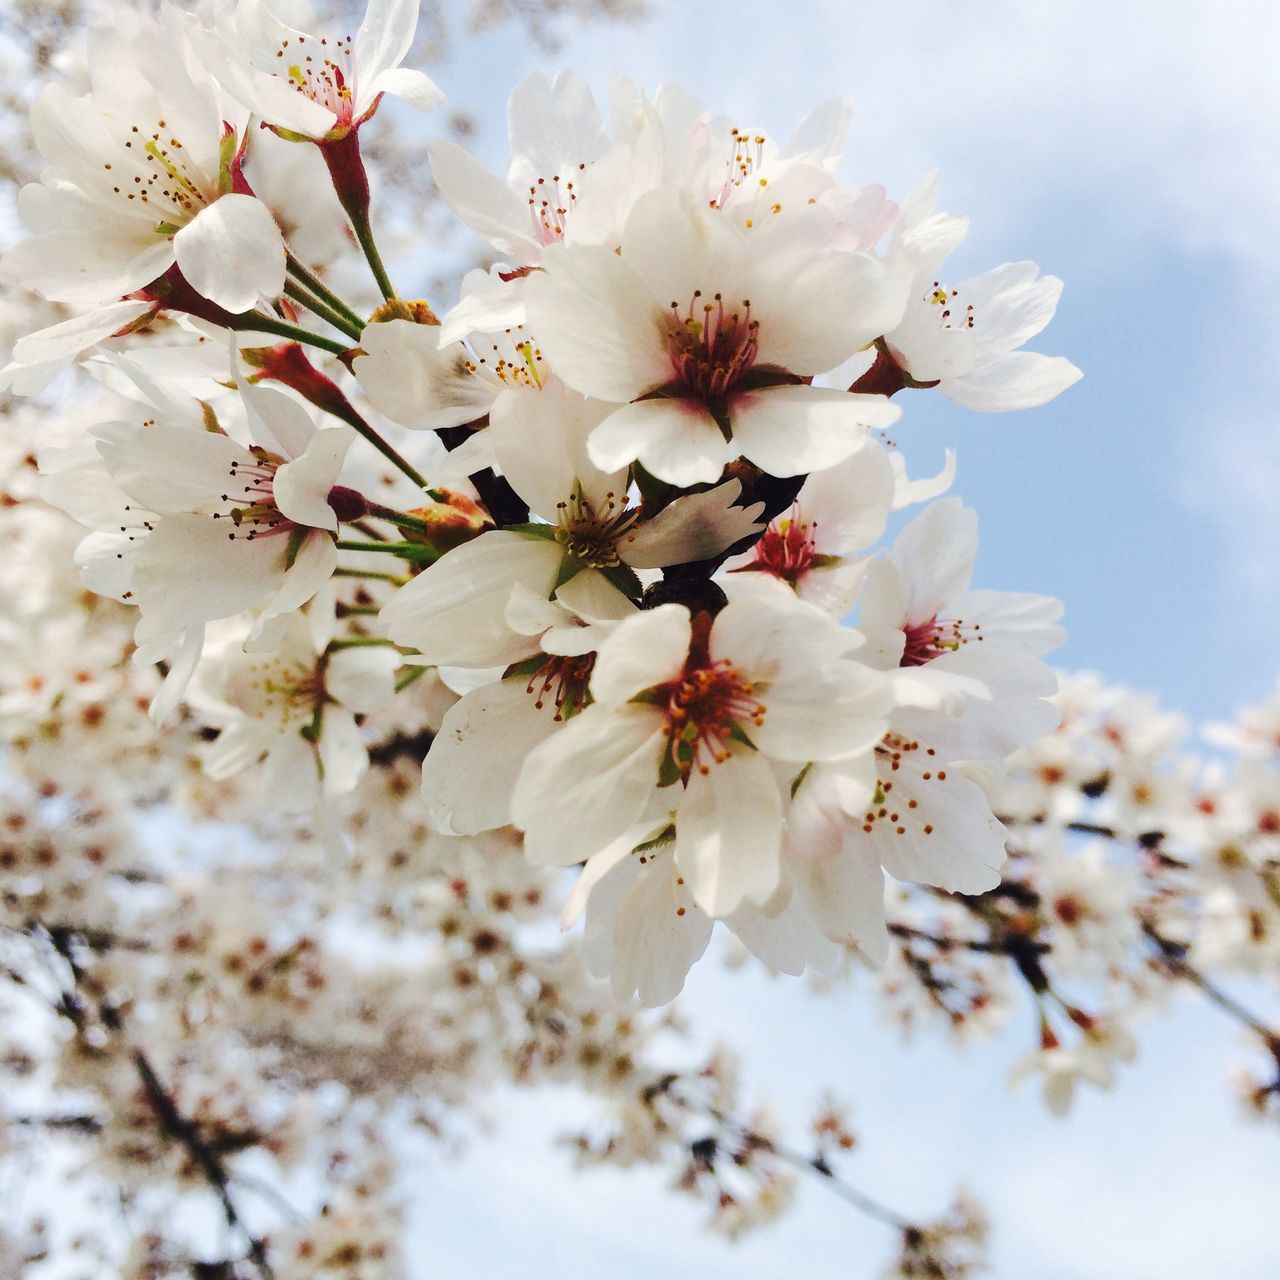 flower, freshness, fragility, growth, cherry blossom, beauty in nature, branch, white color, petal, blossom, low angle view, tree, nature, cherry tree, fruit tree, orchard, close-up, in bloom, blooming, twig